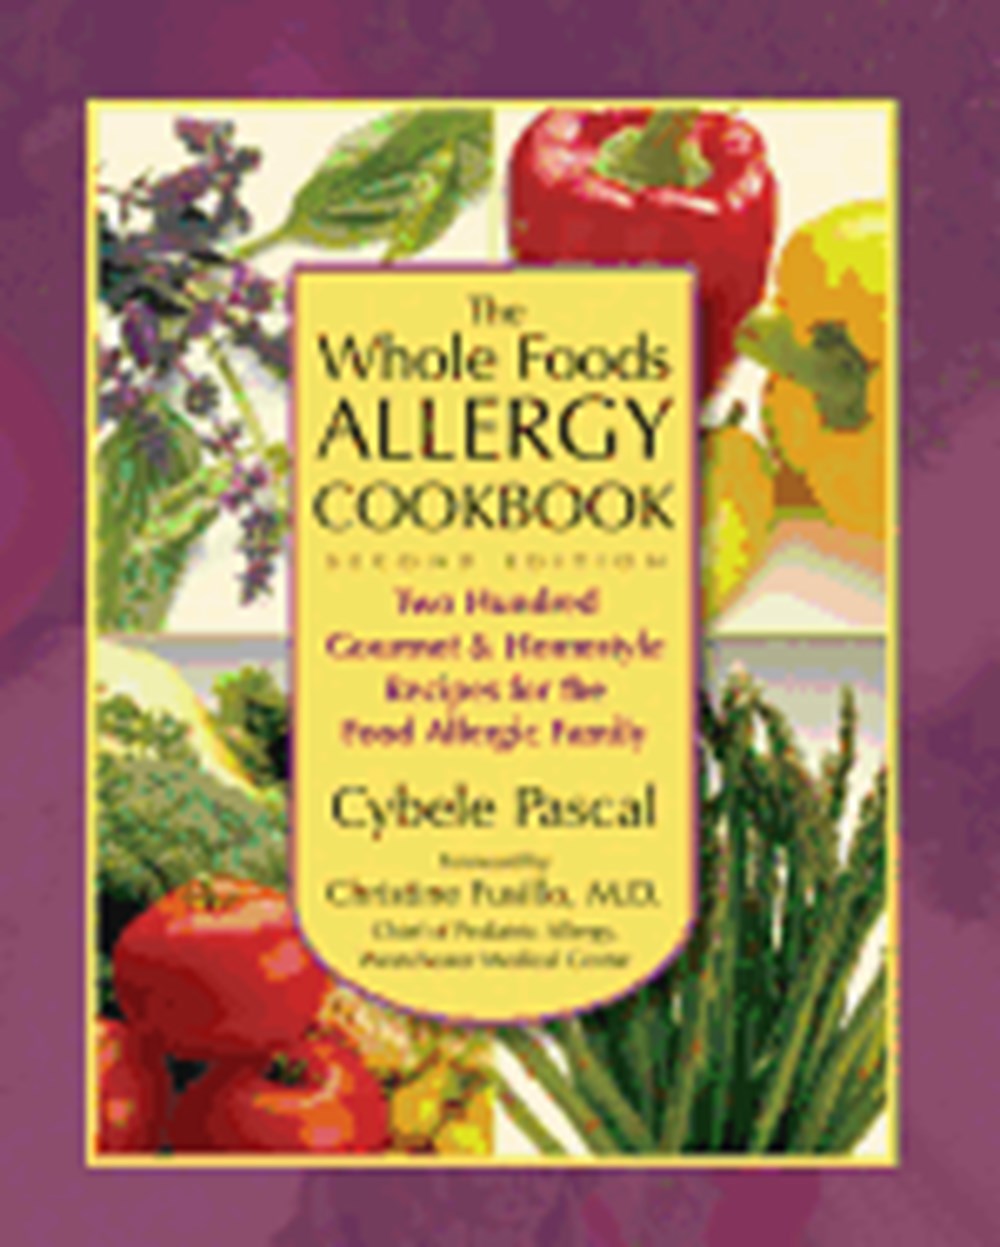 Whole Foods Allergy Cookbook, 2nd Edition: Two Hundred Gourmet & Homestyle Recipes for the Food Alle